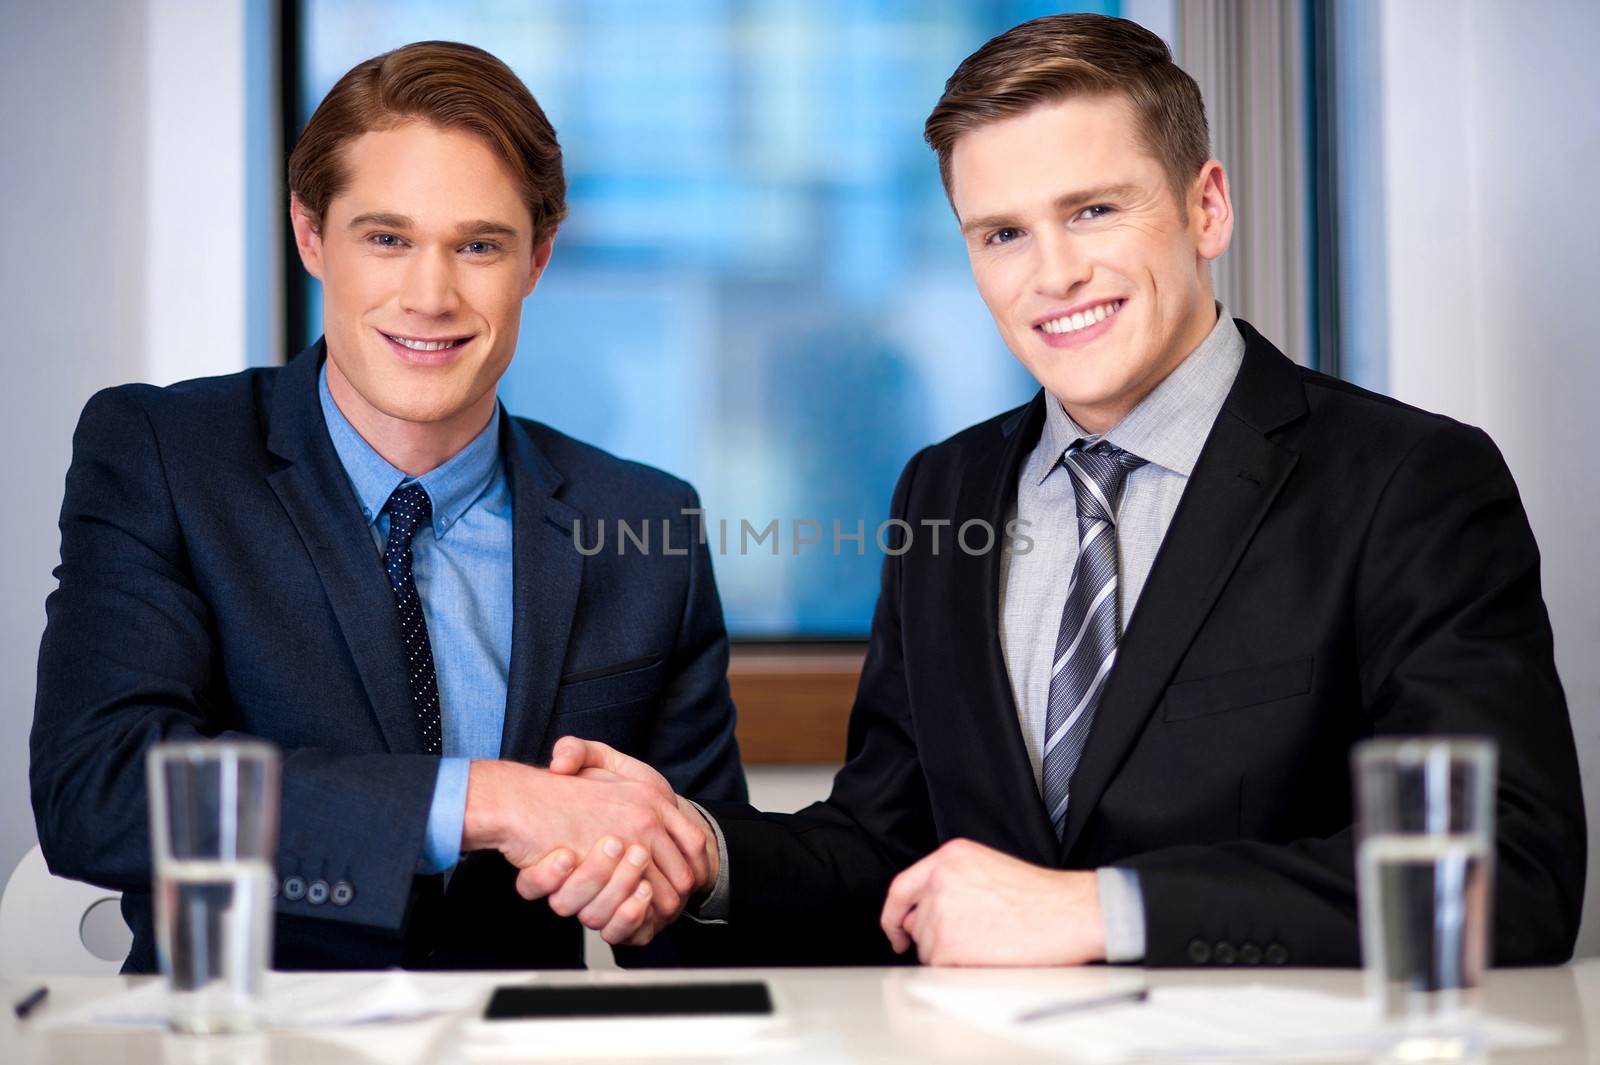 Businessmen shake hands to seal the deal